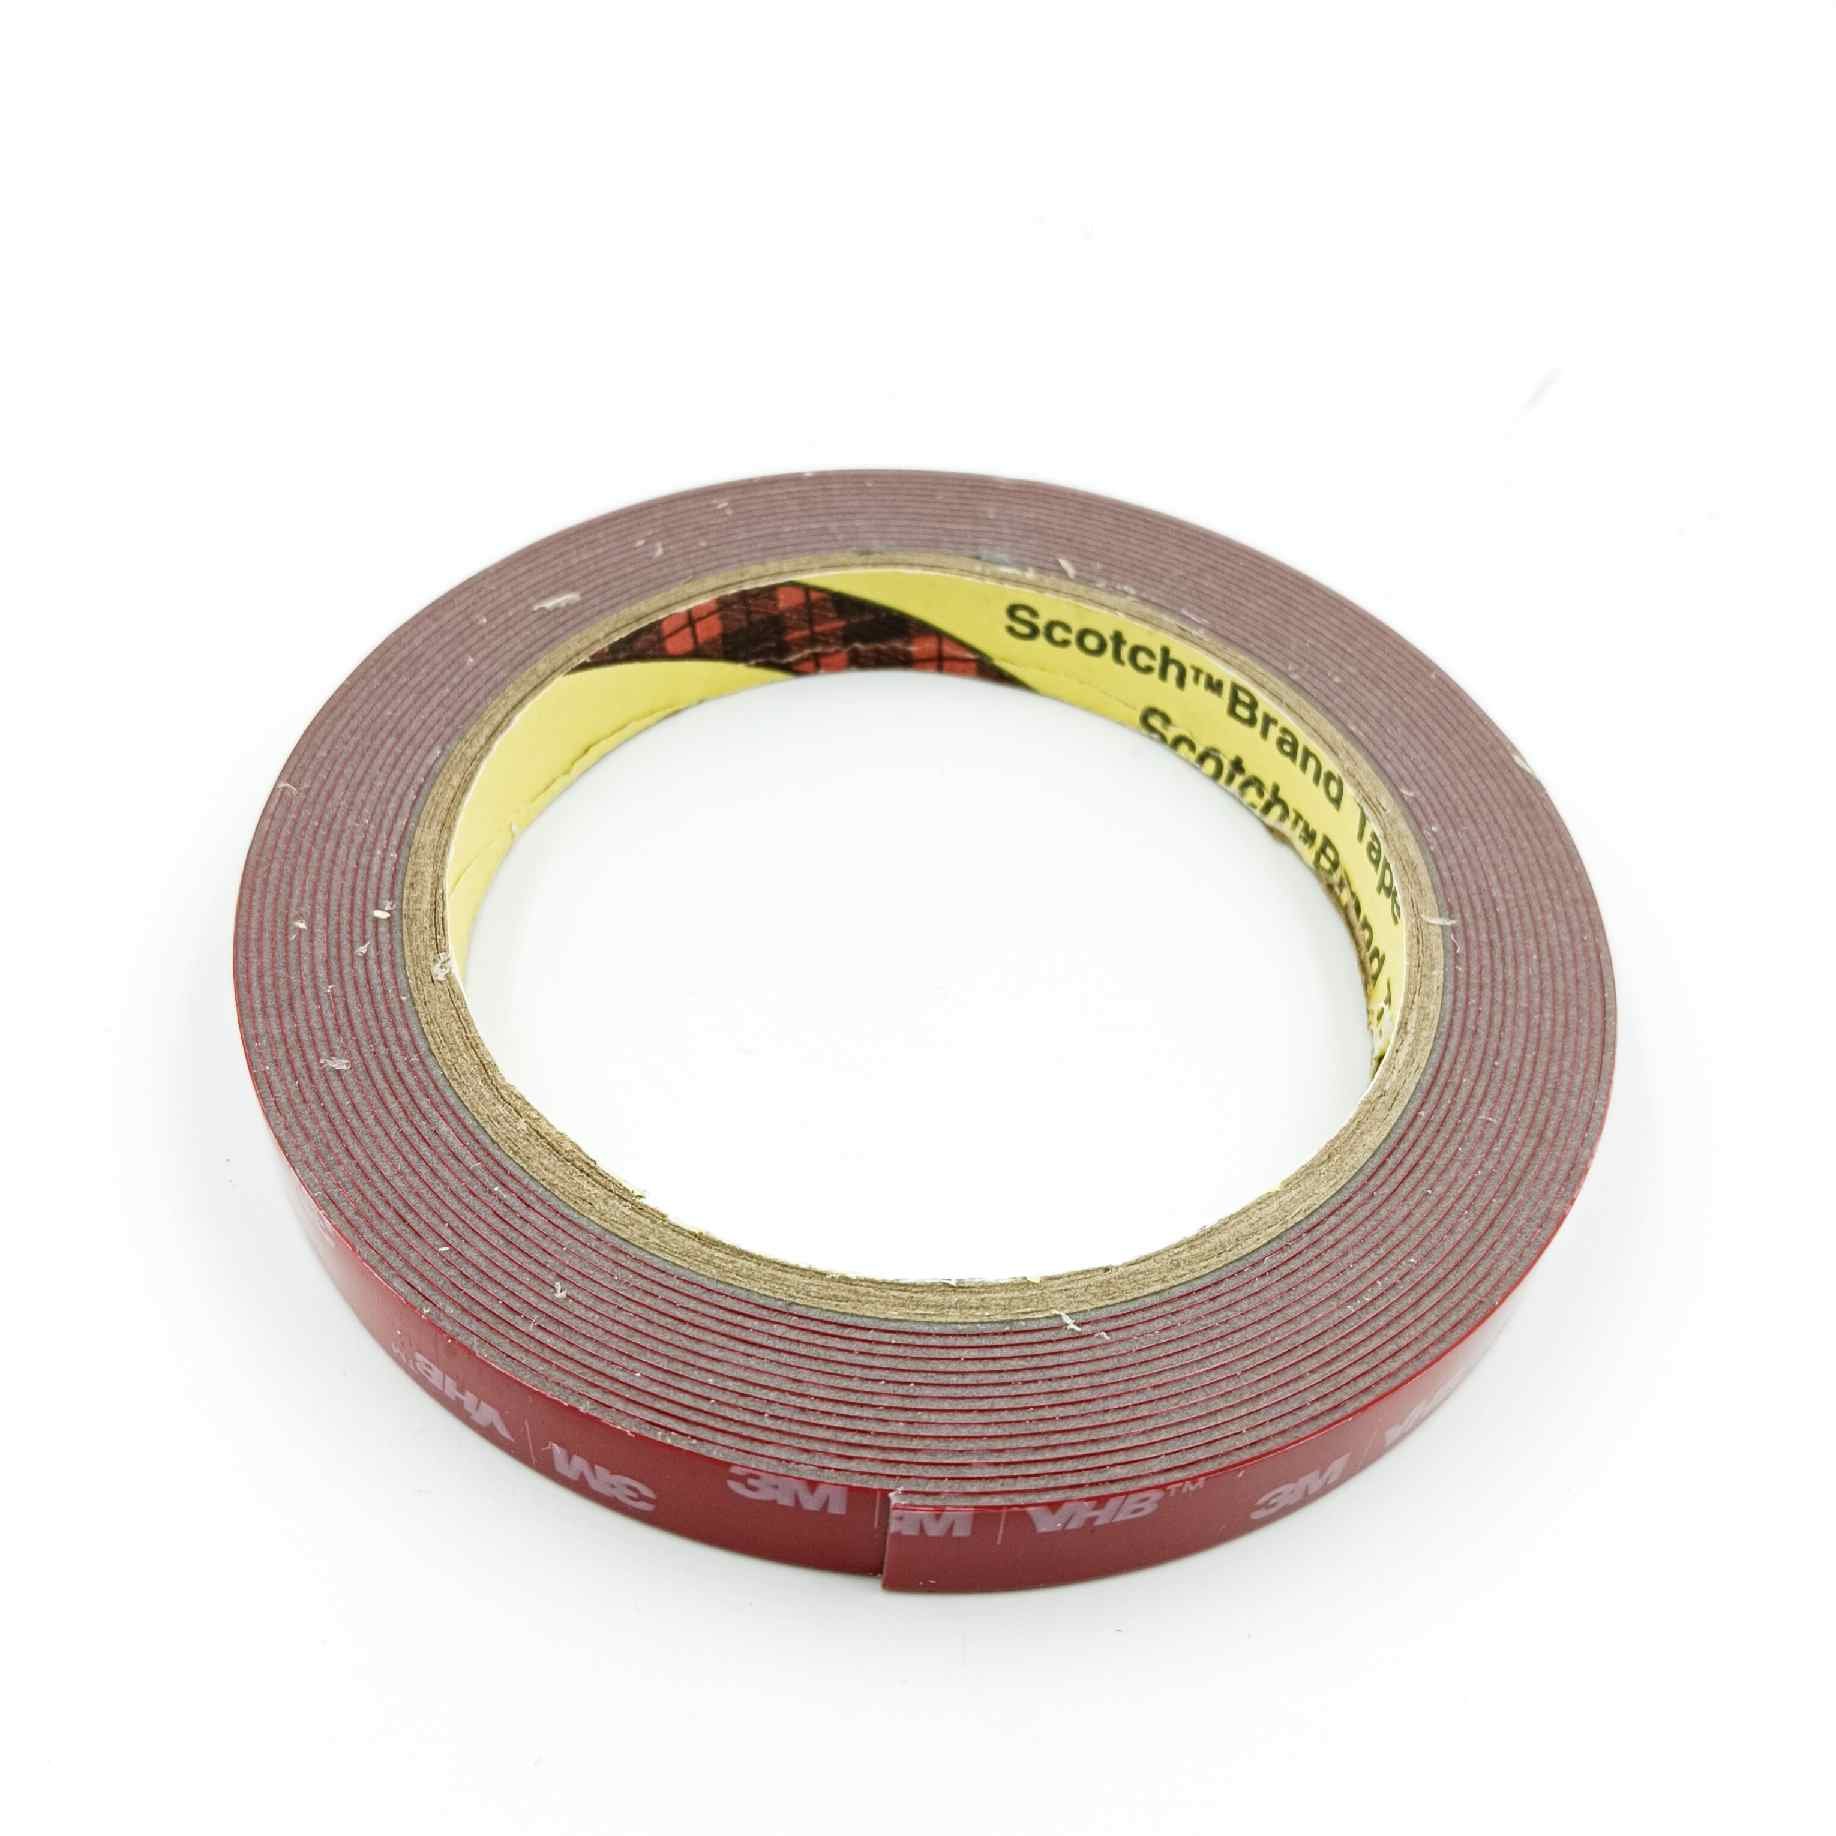 24 Wholesale 3m Double Sided Adhesive 8pcs - 1 Round - at